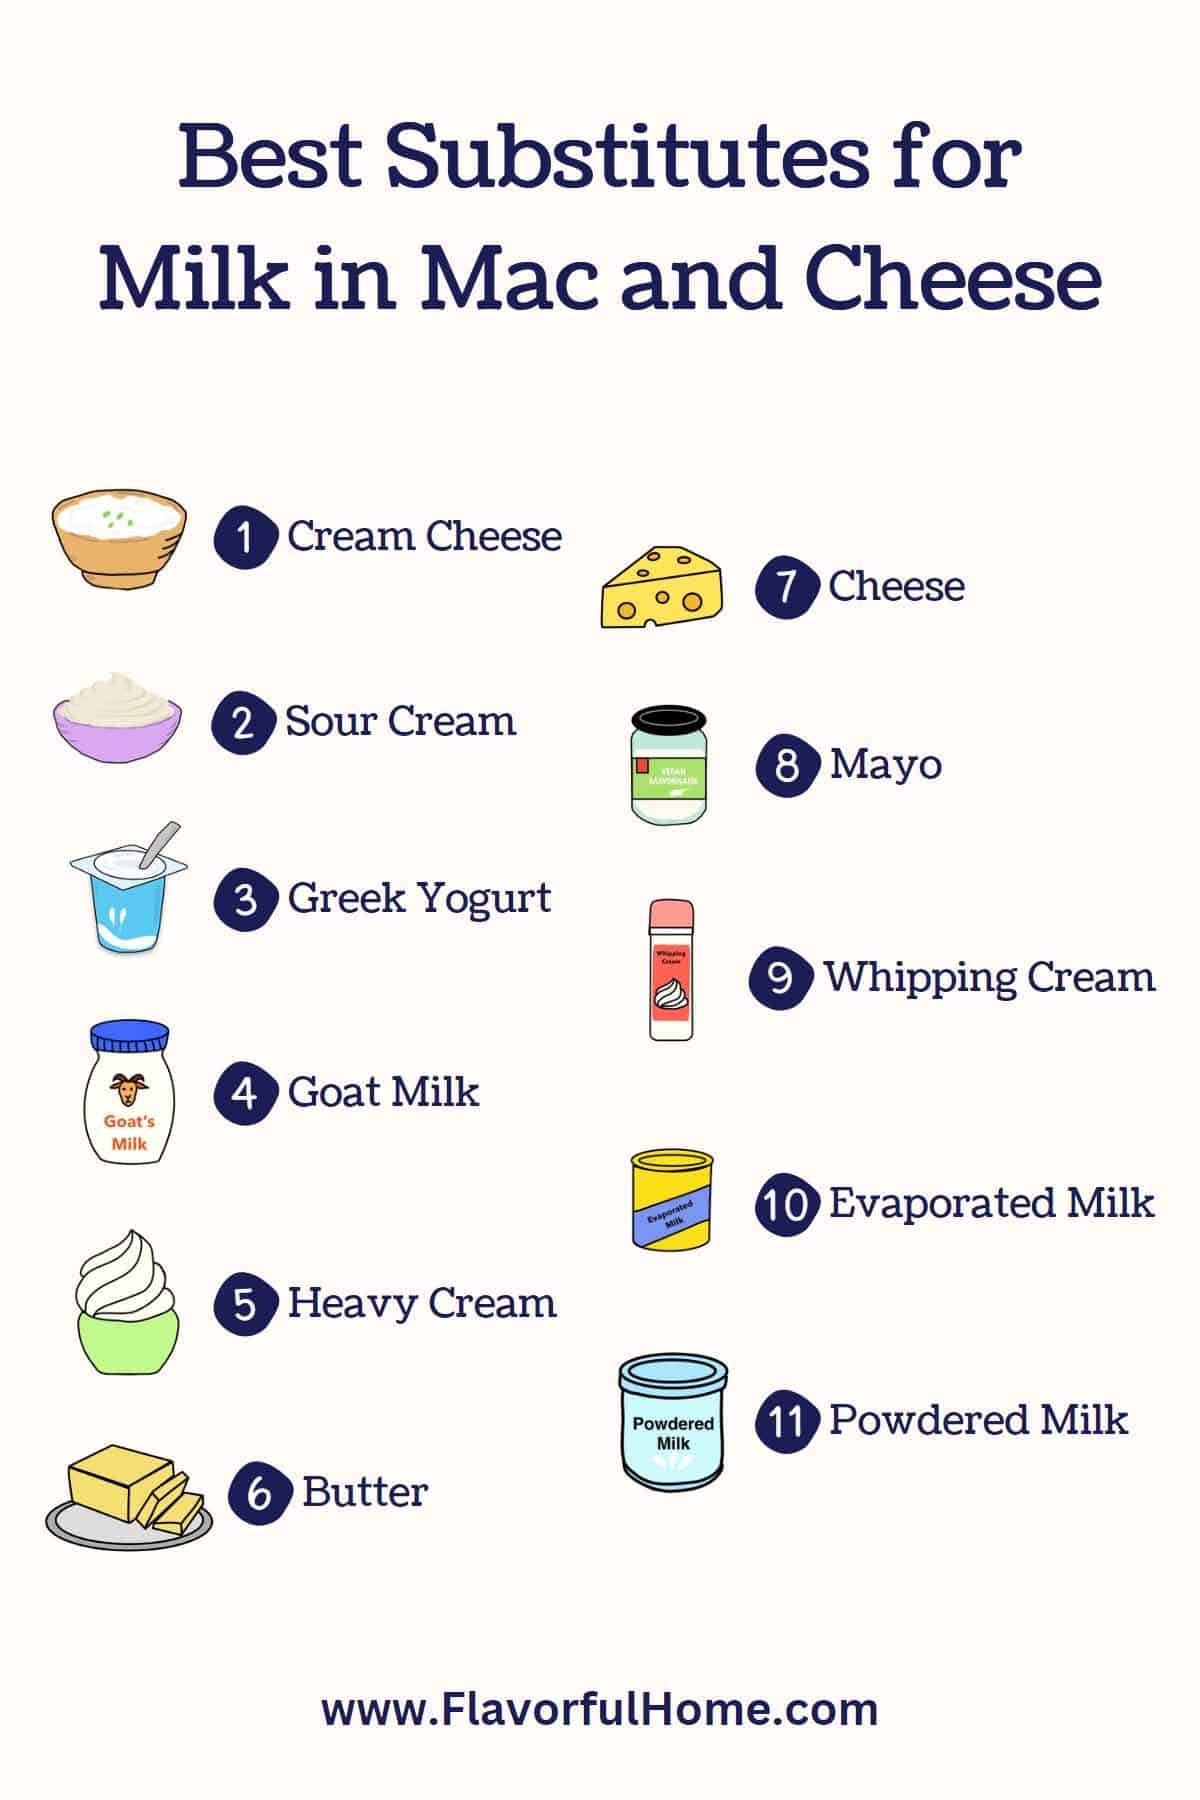 Infographic showing all of the Substitutes for Milk in Mac and Cheese.